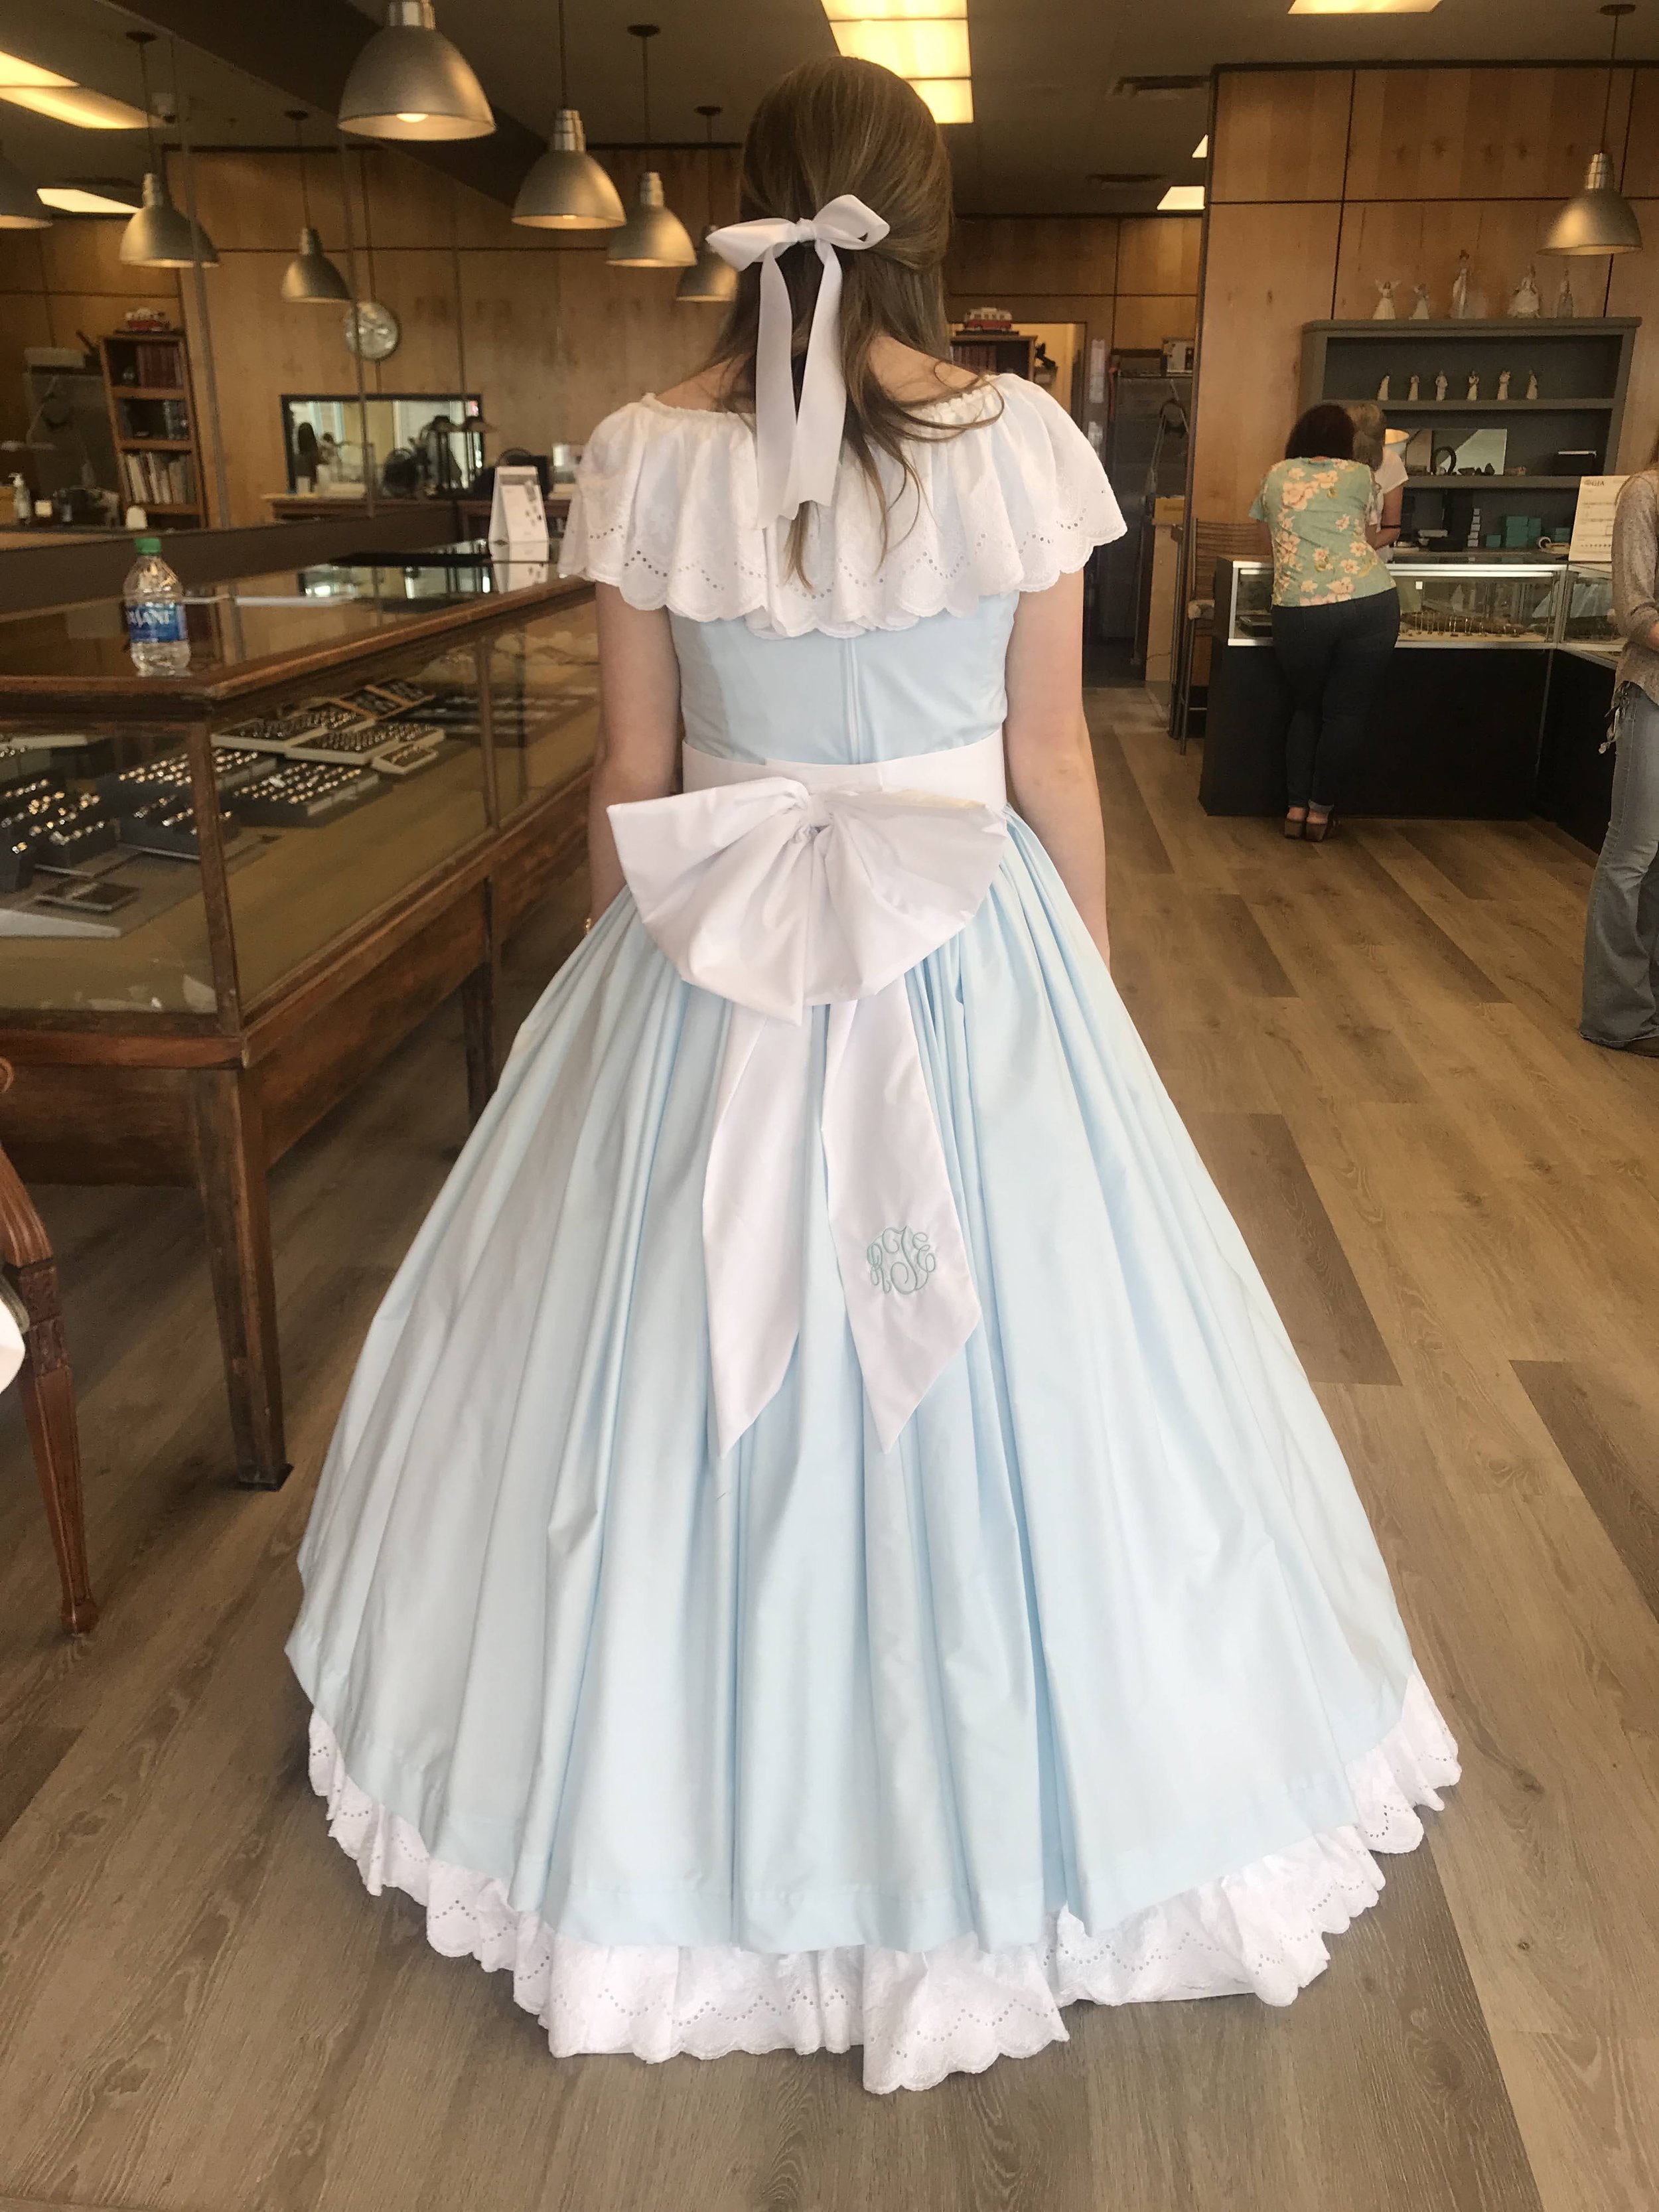 I Made a Ball Gown! Here's my original design sketch and the completed dress  : r/somethingimade